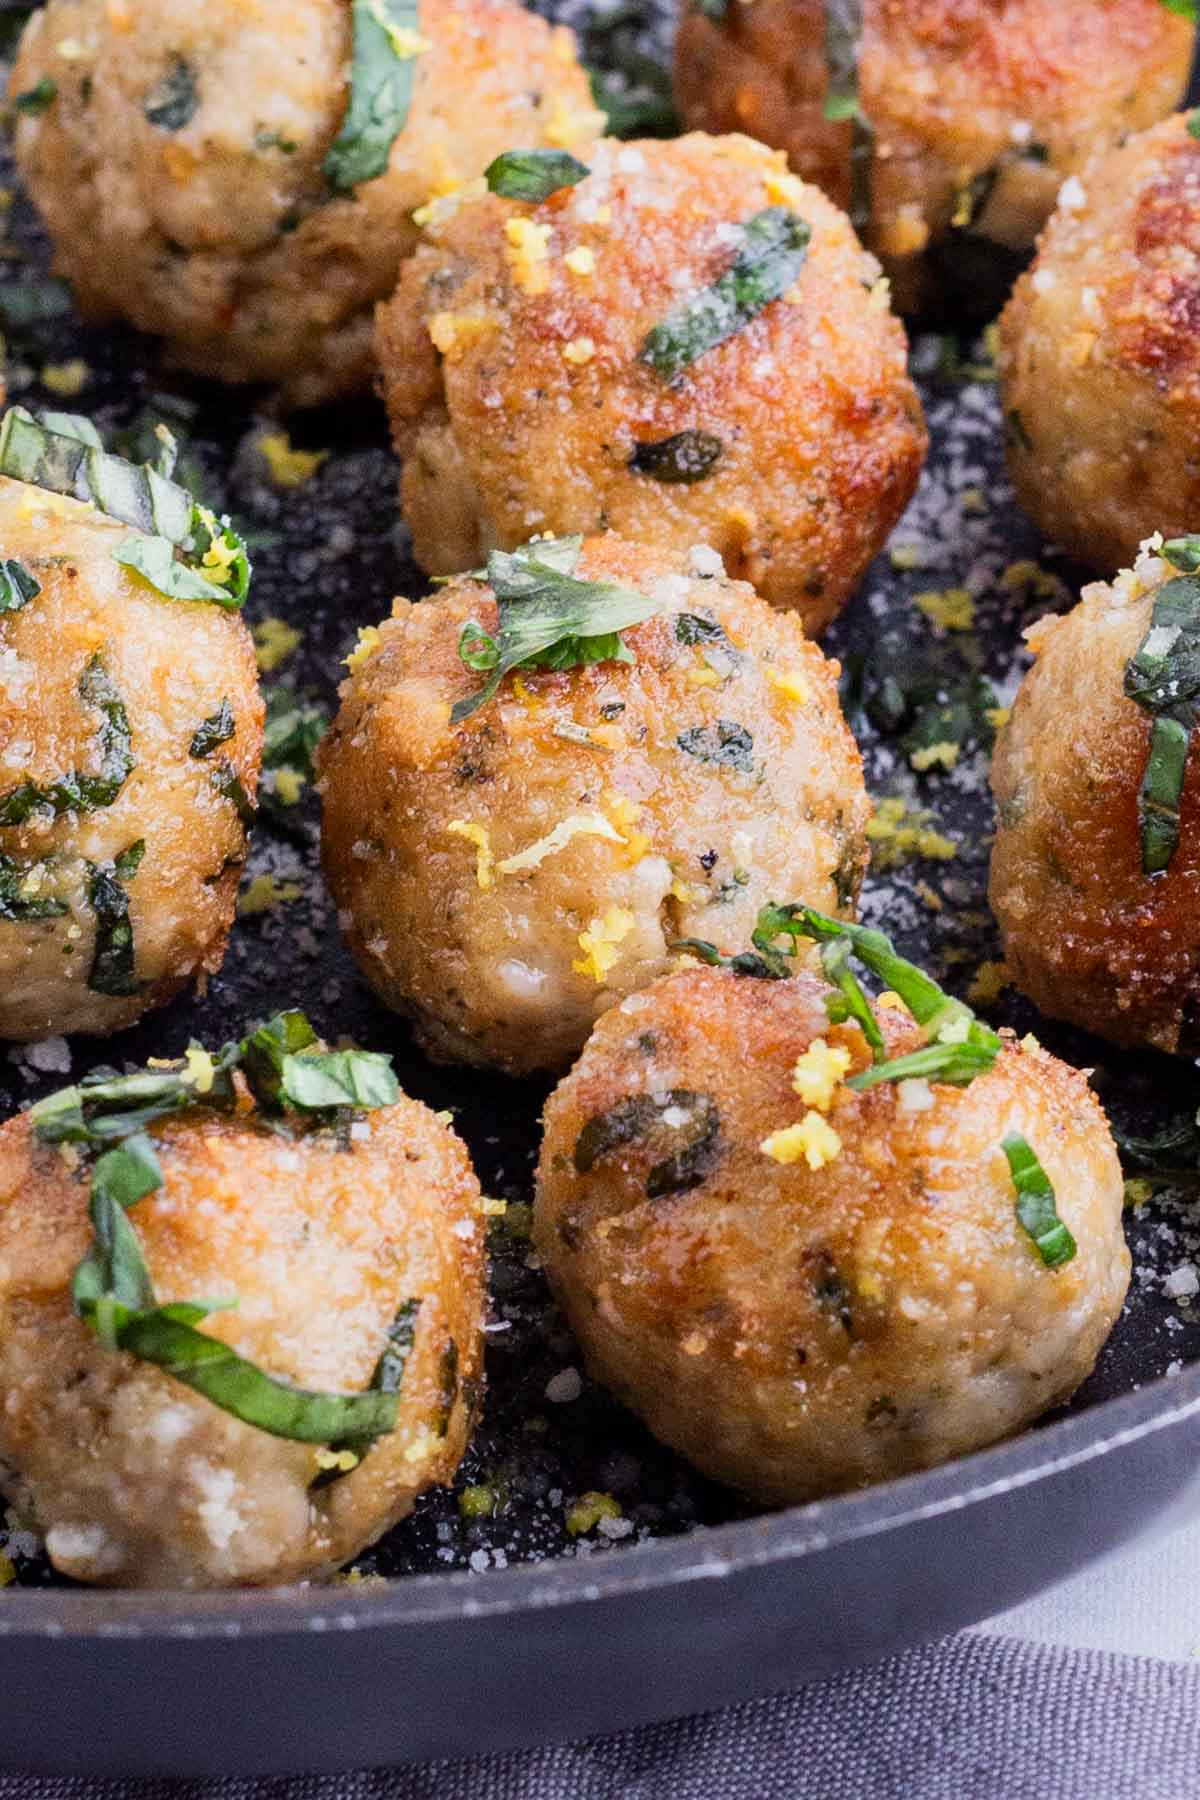 Chicken meatballs are cooked in a skillet.